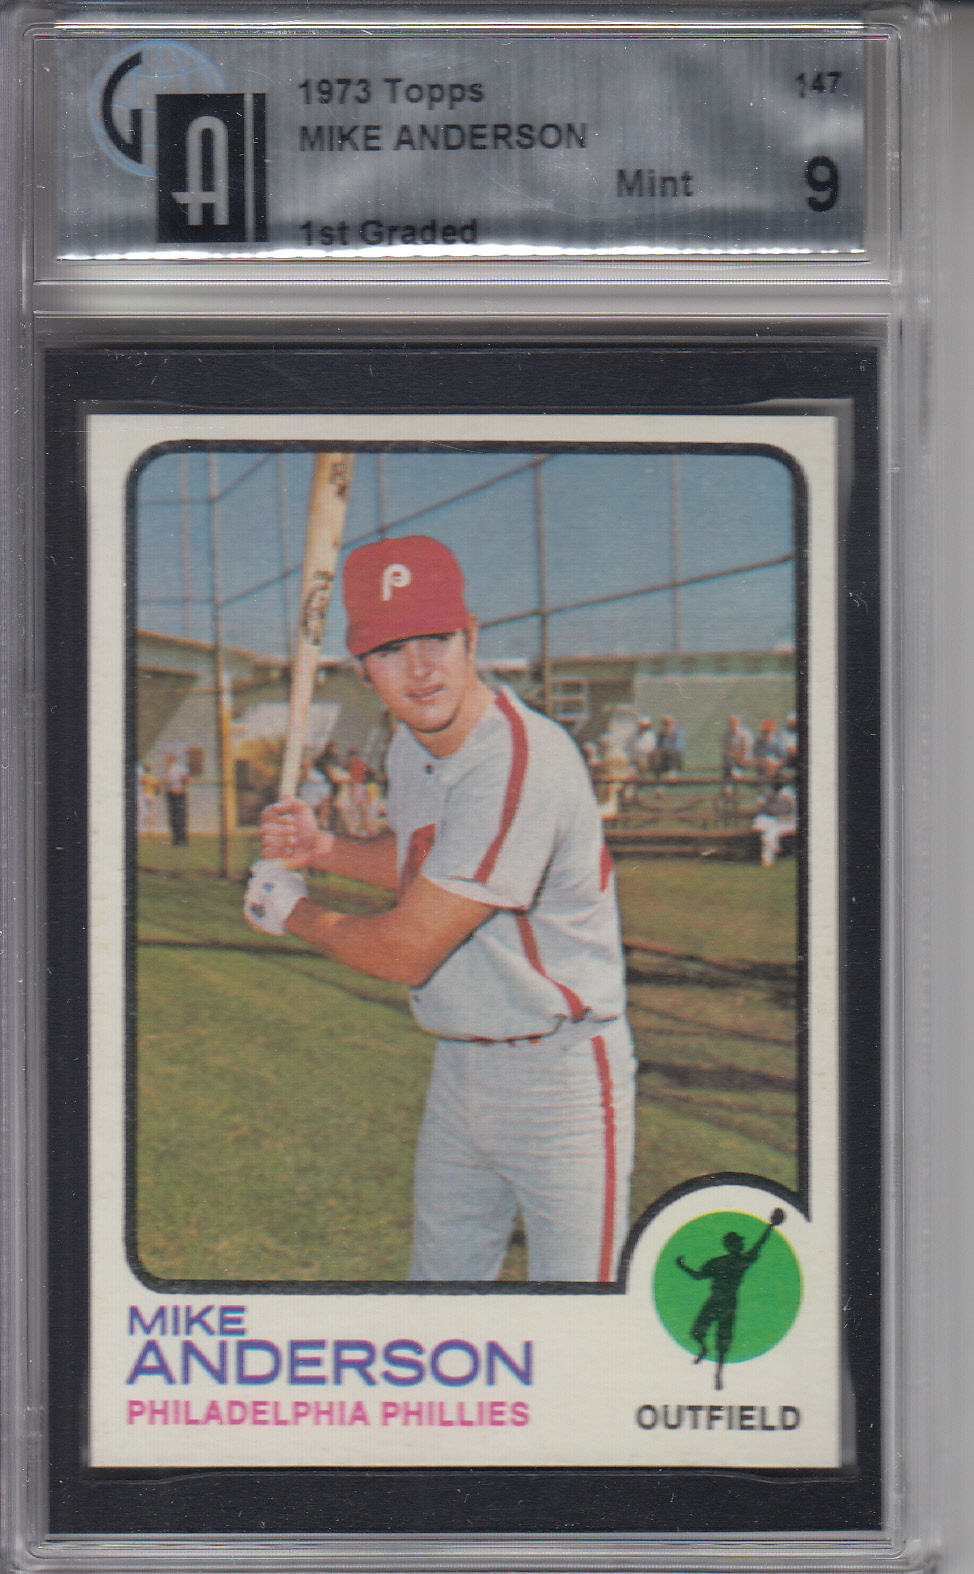 1973 Topps #147 Mike Anderson PHILLIES GAI 9 MT Z15895